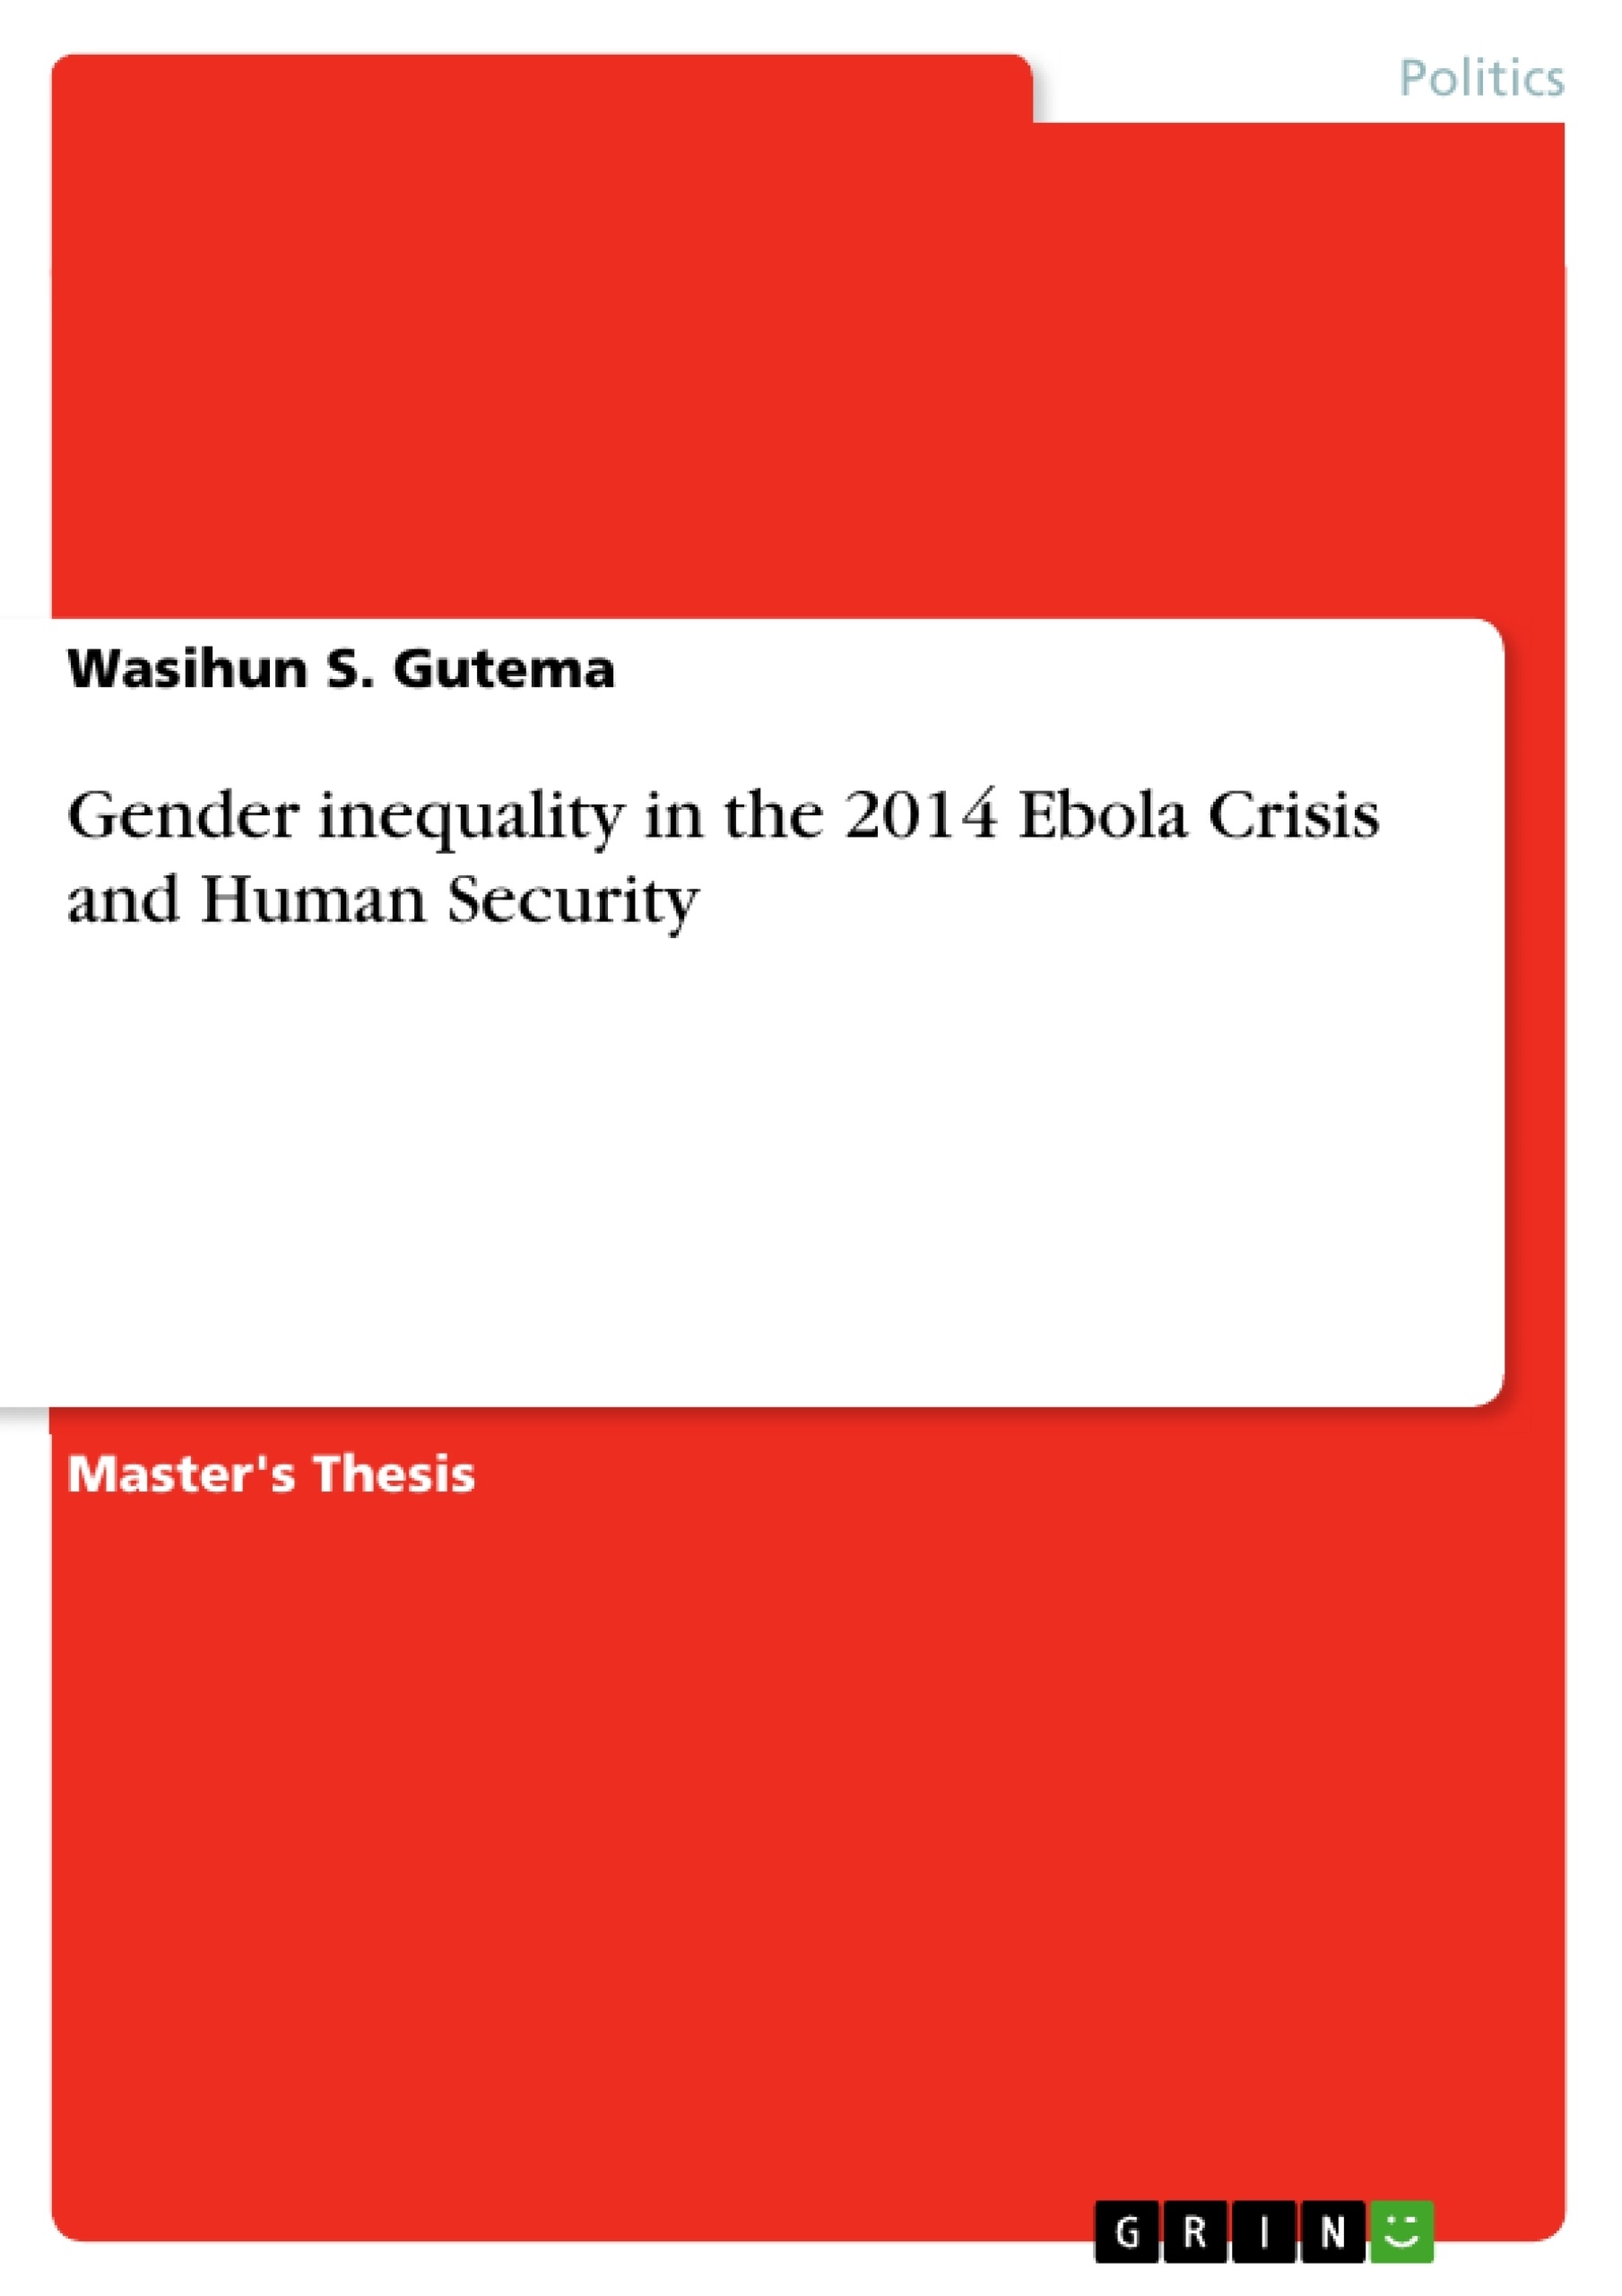 Título: Gender inequality in the 2014 Ebola Crisis and Human Security